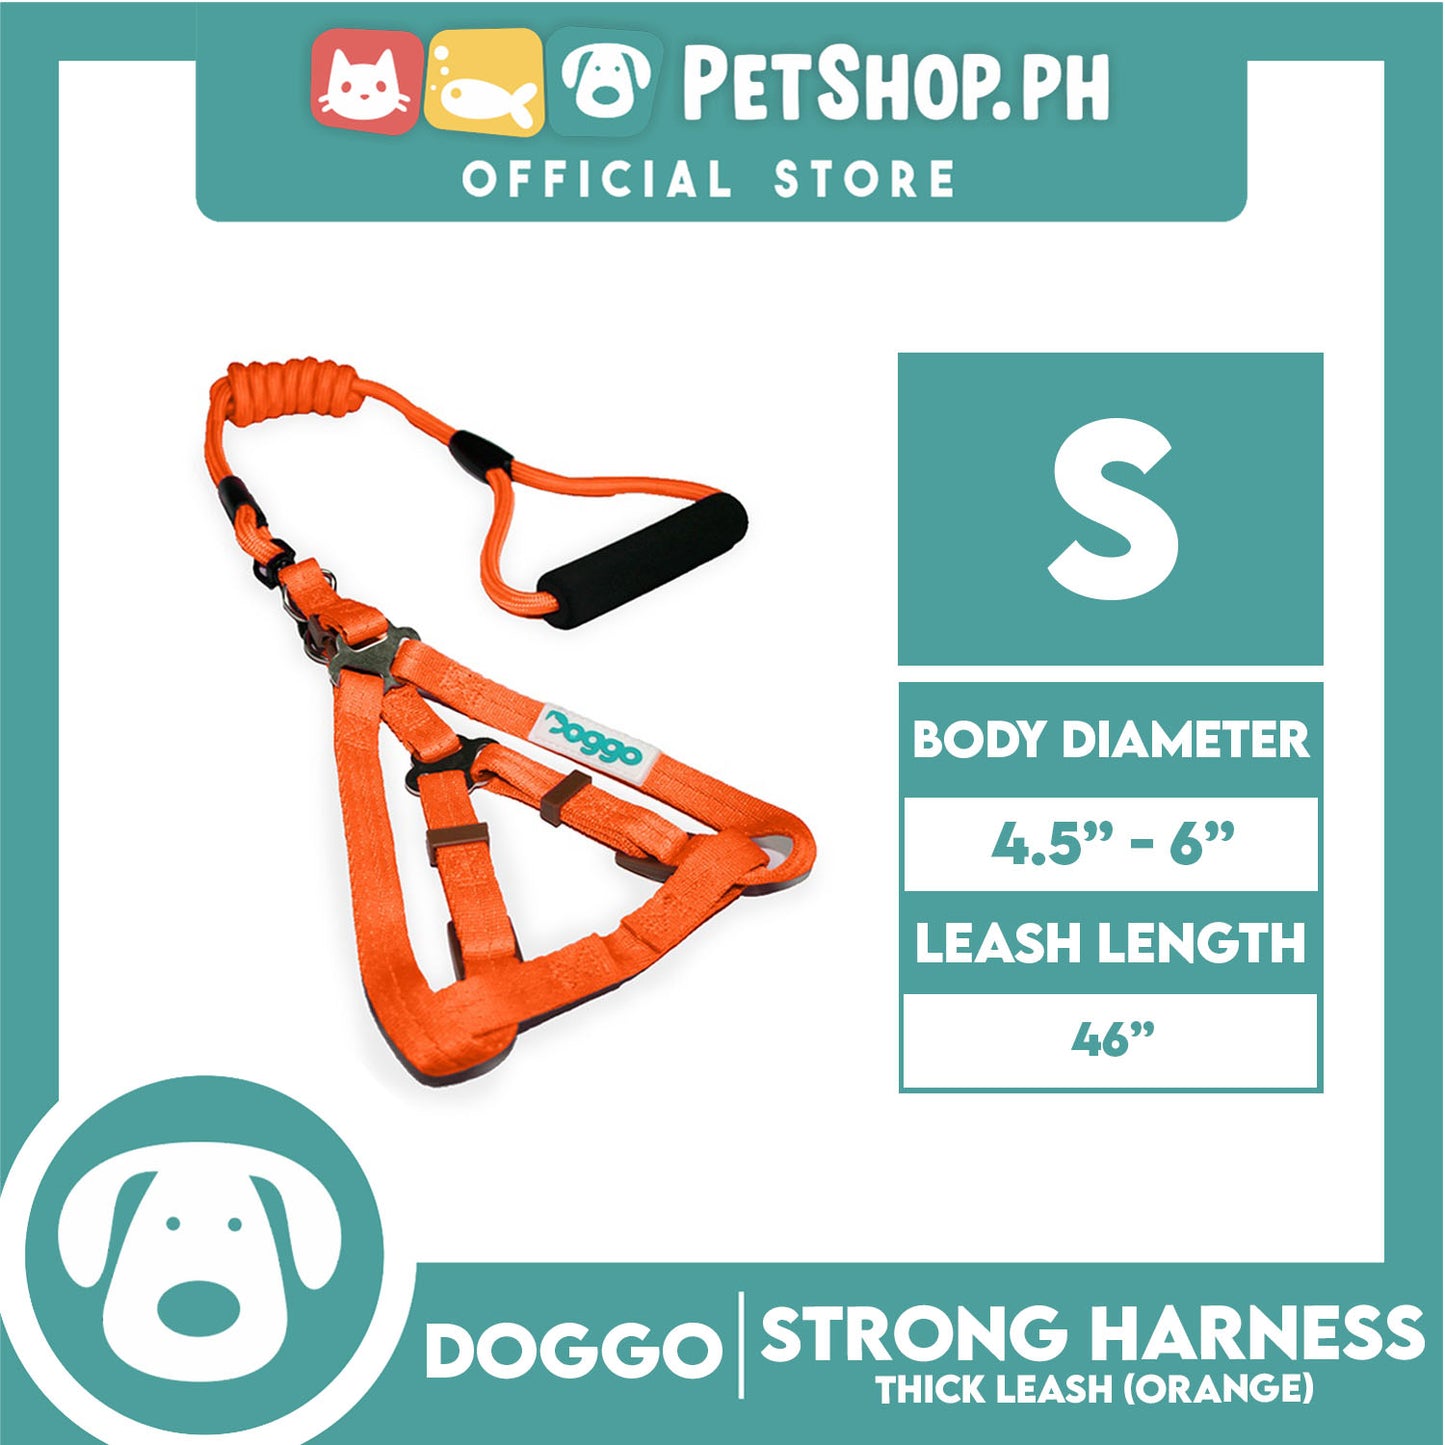 Doggo Strong Harness Thick Leash Soft Handle Steel Connector Small (Orange) Safe Harness for Your Dog